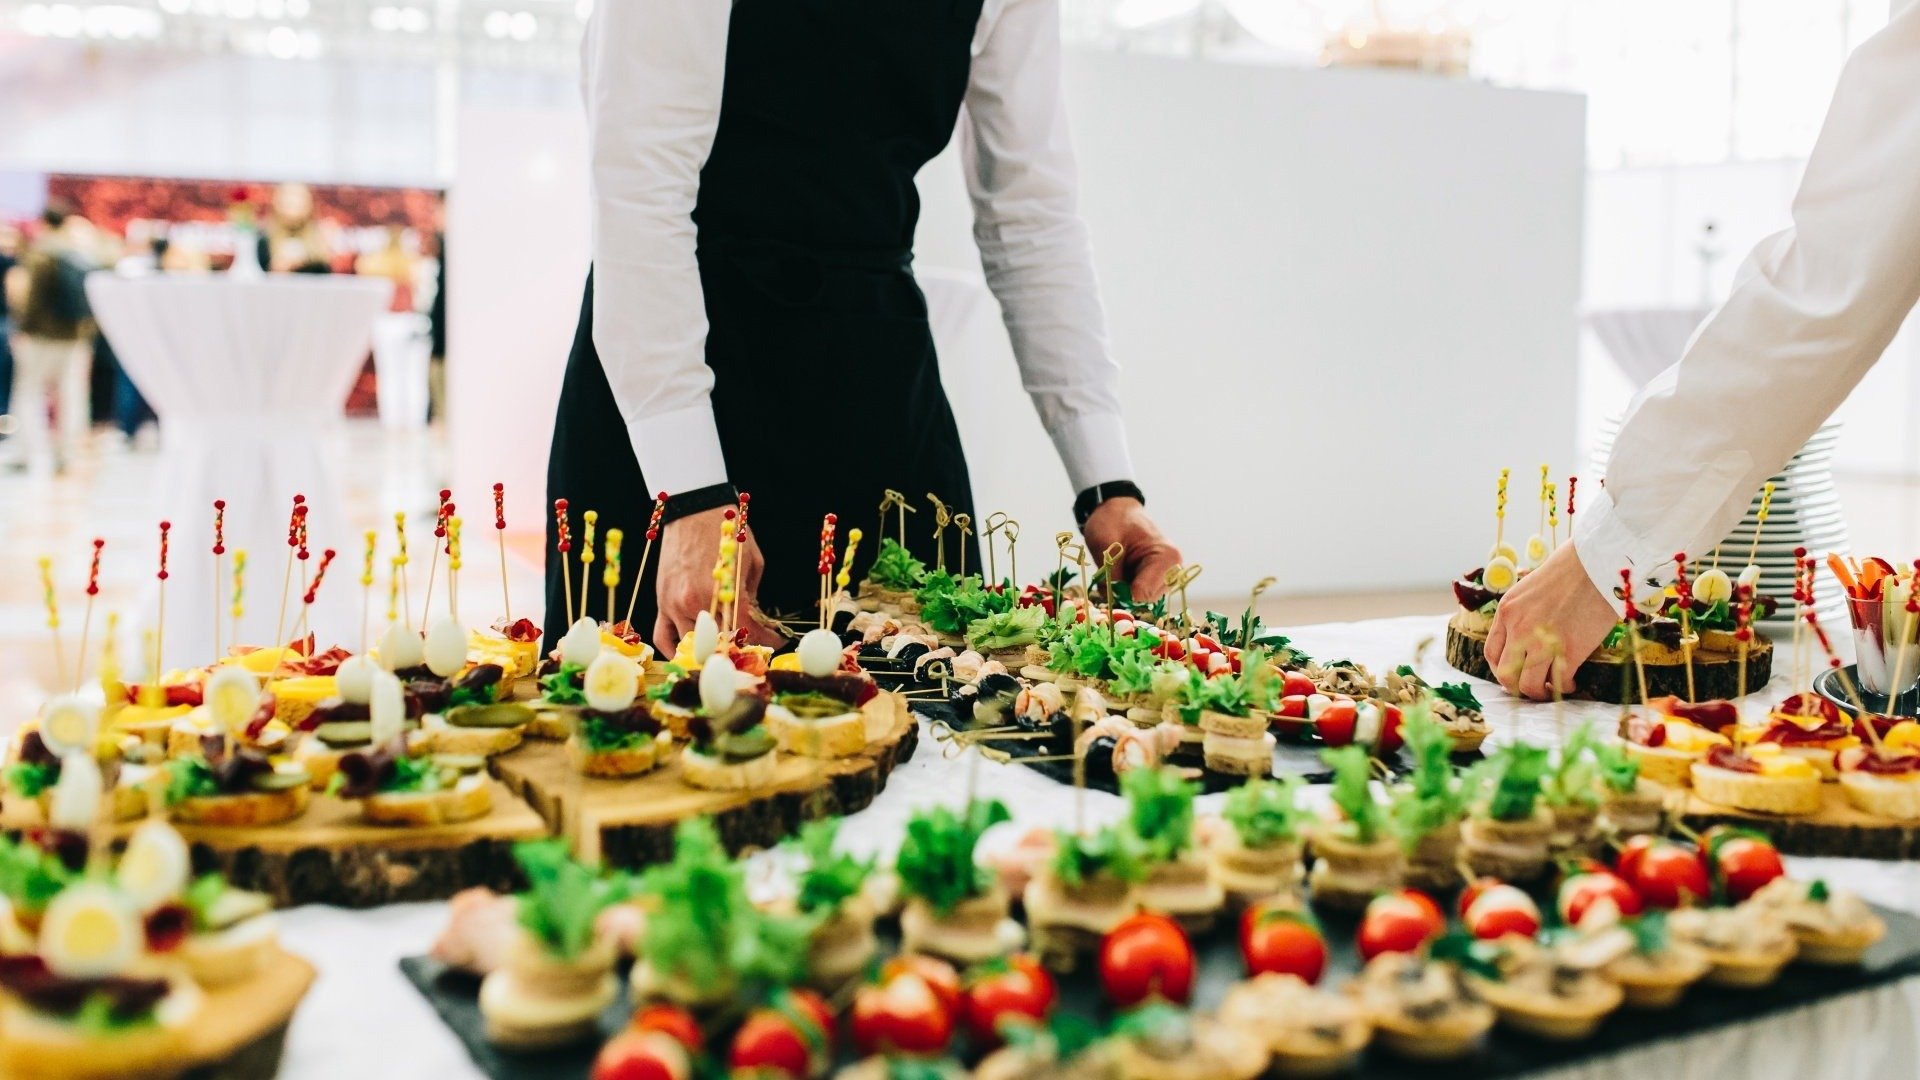 Tips and tricks on how to create healthy menus for catering events